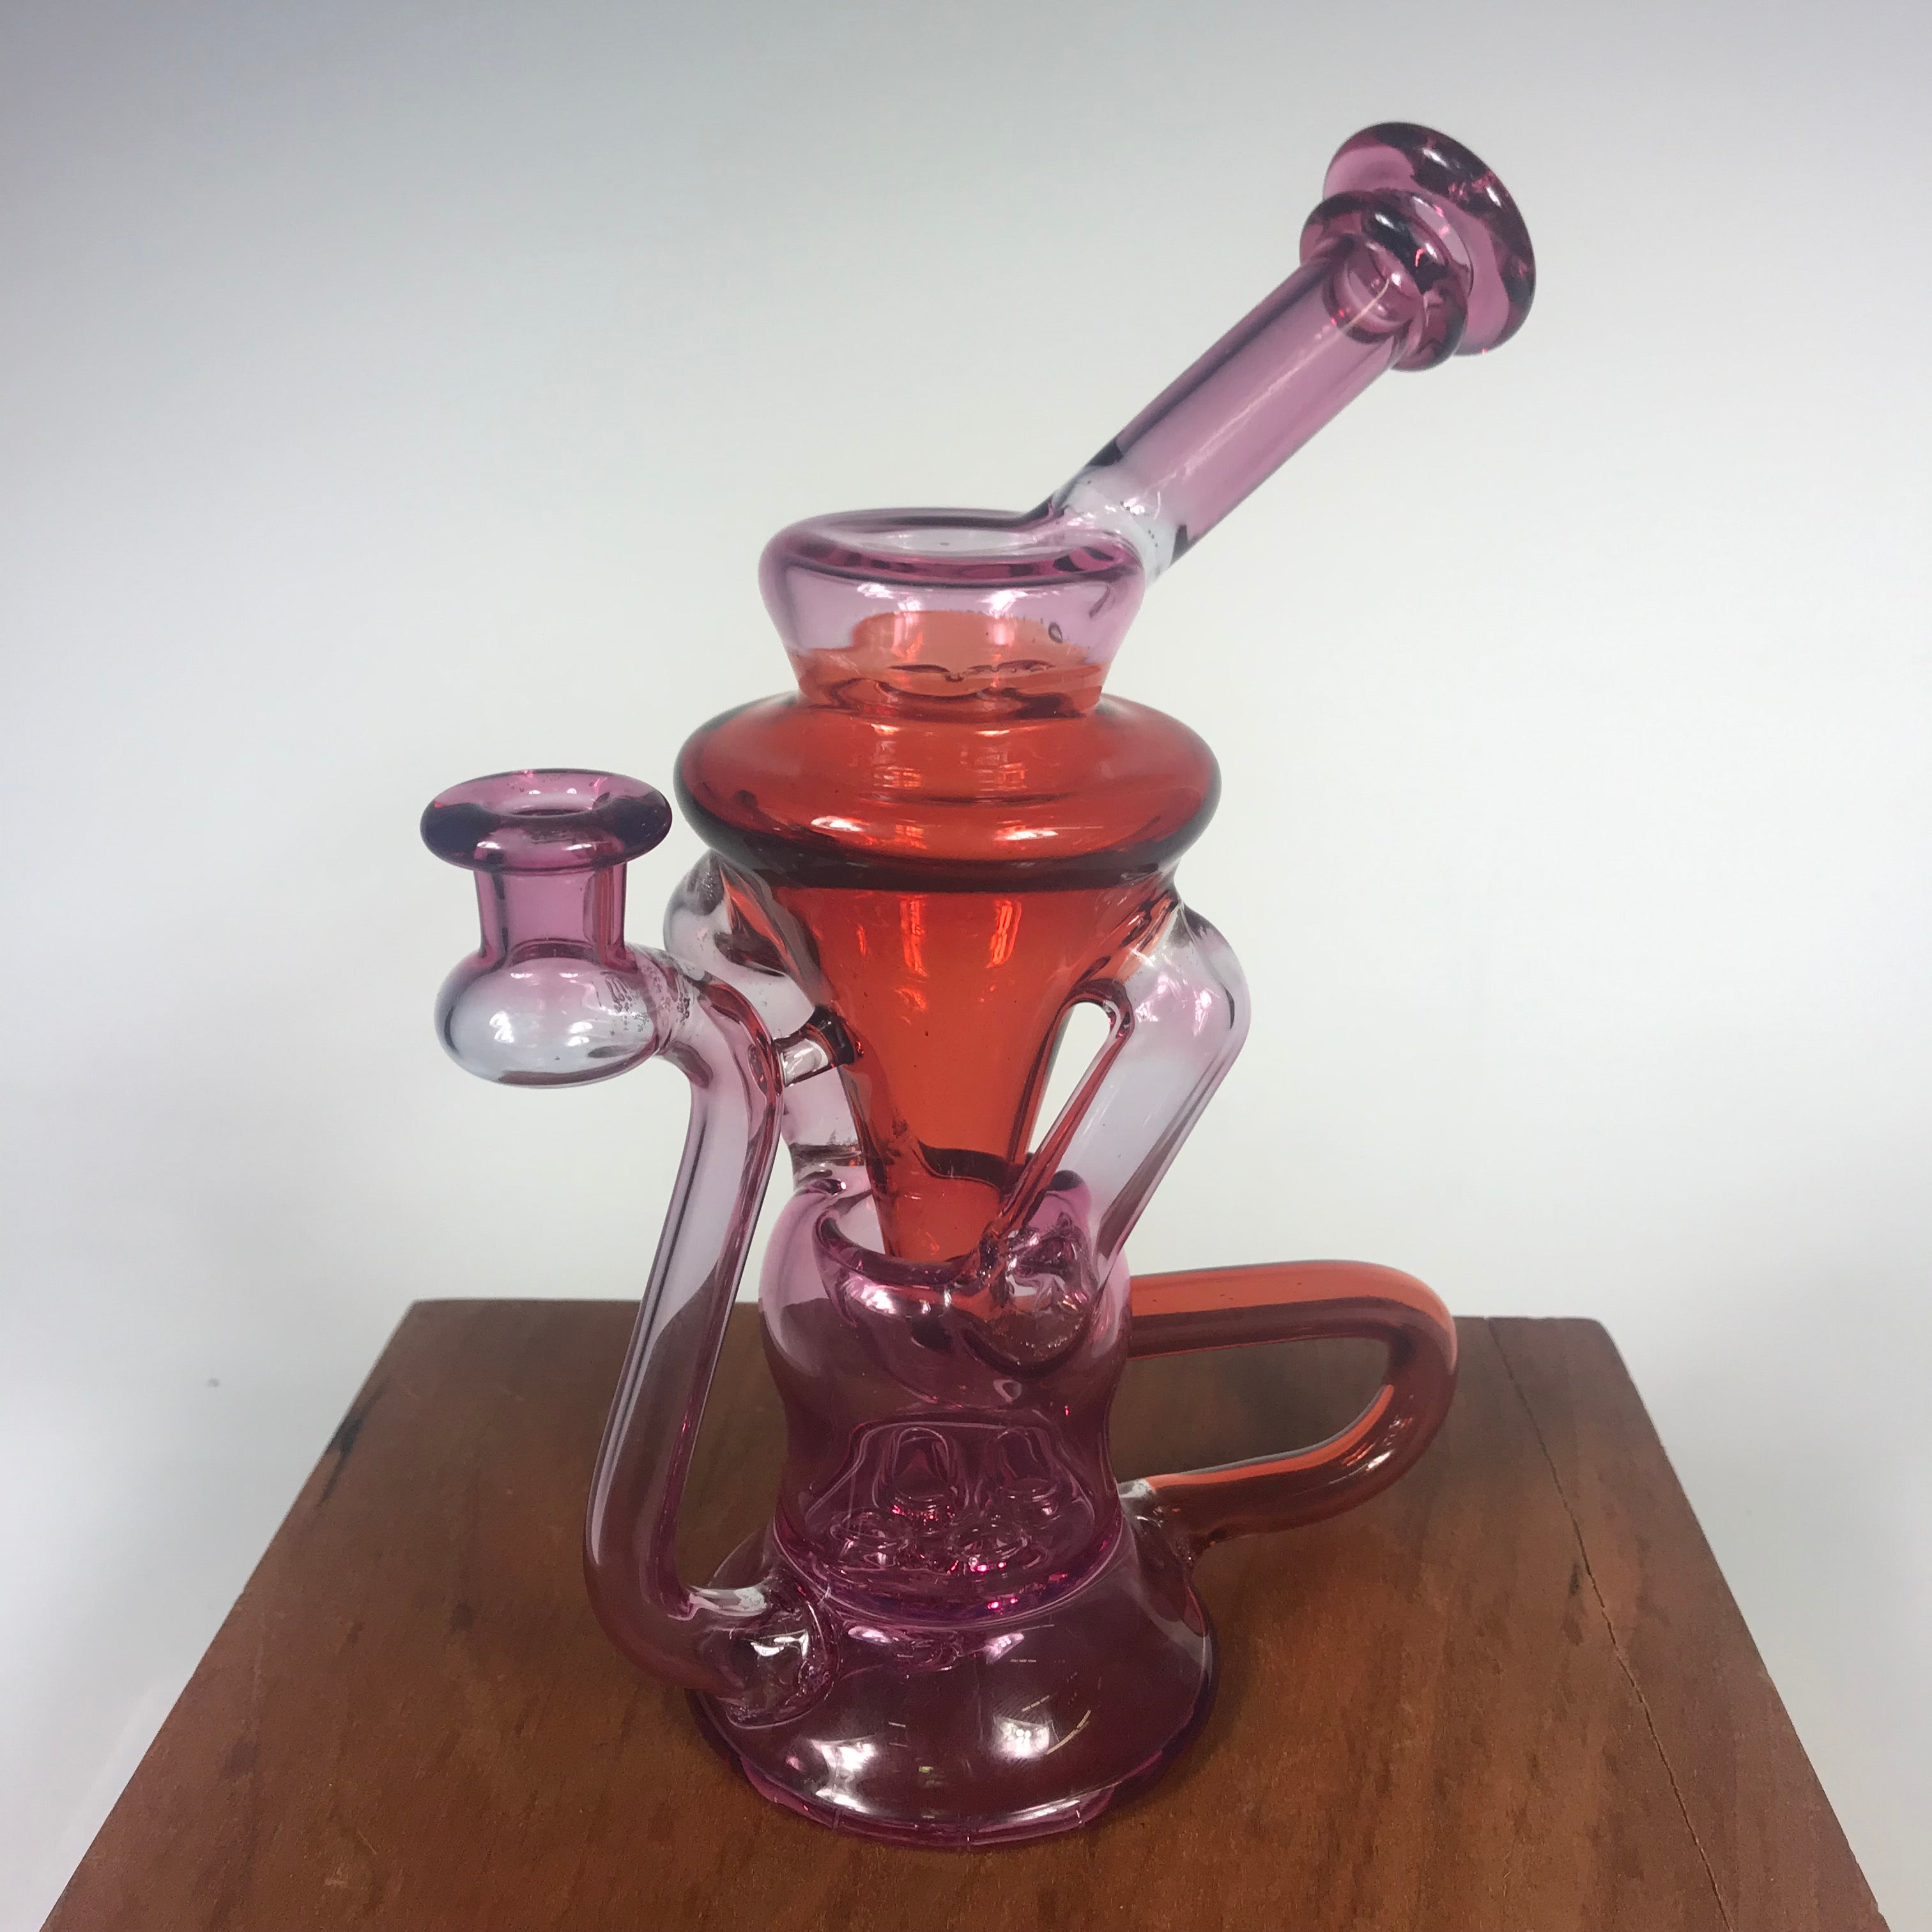 Walmot V1 Fully Worked Recycler